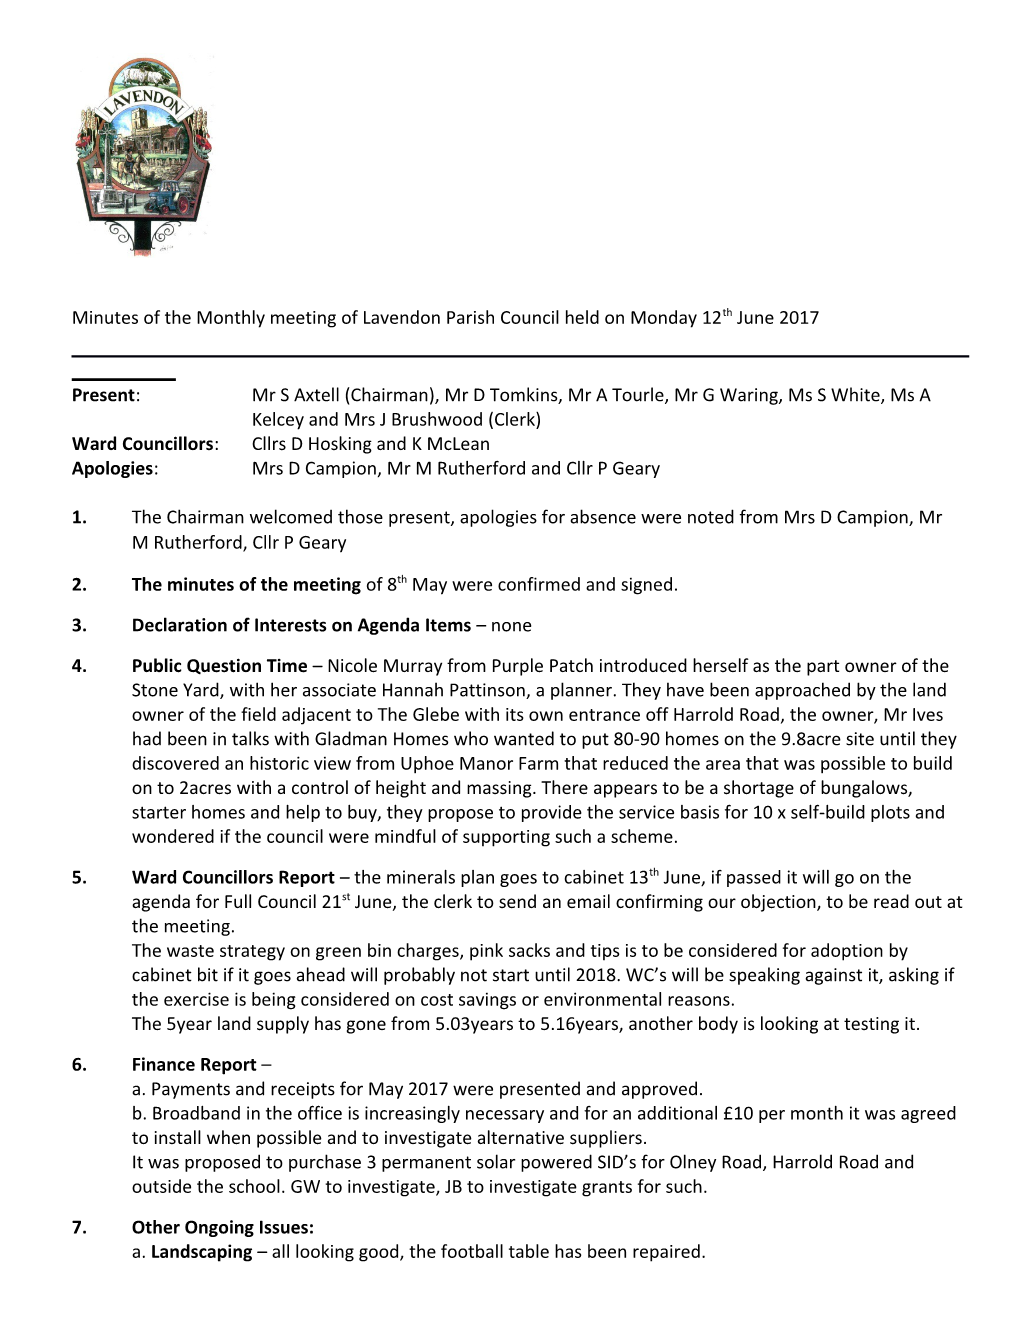 Minutes of the Monthly Meeting of Lavendon Parish Council Held on Monday12thjune 2017